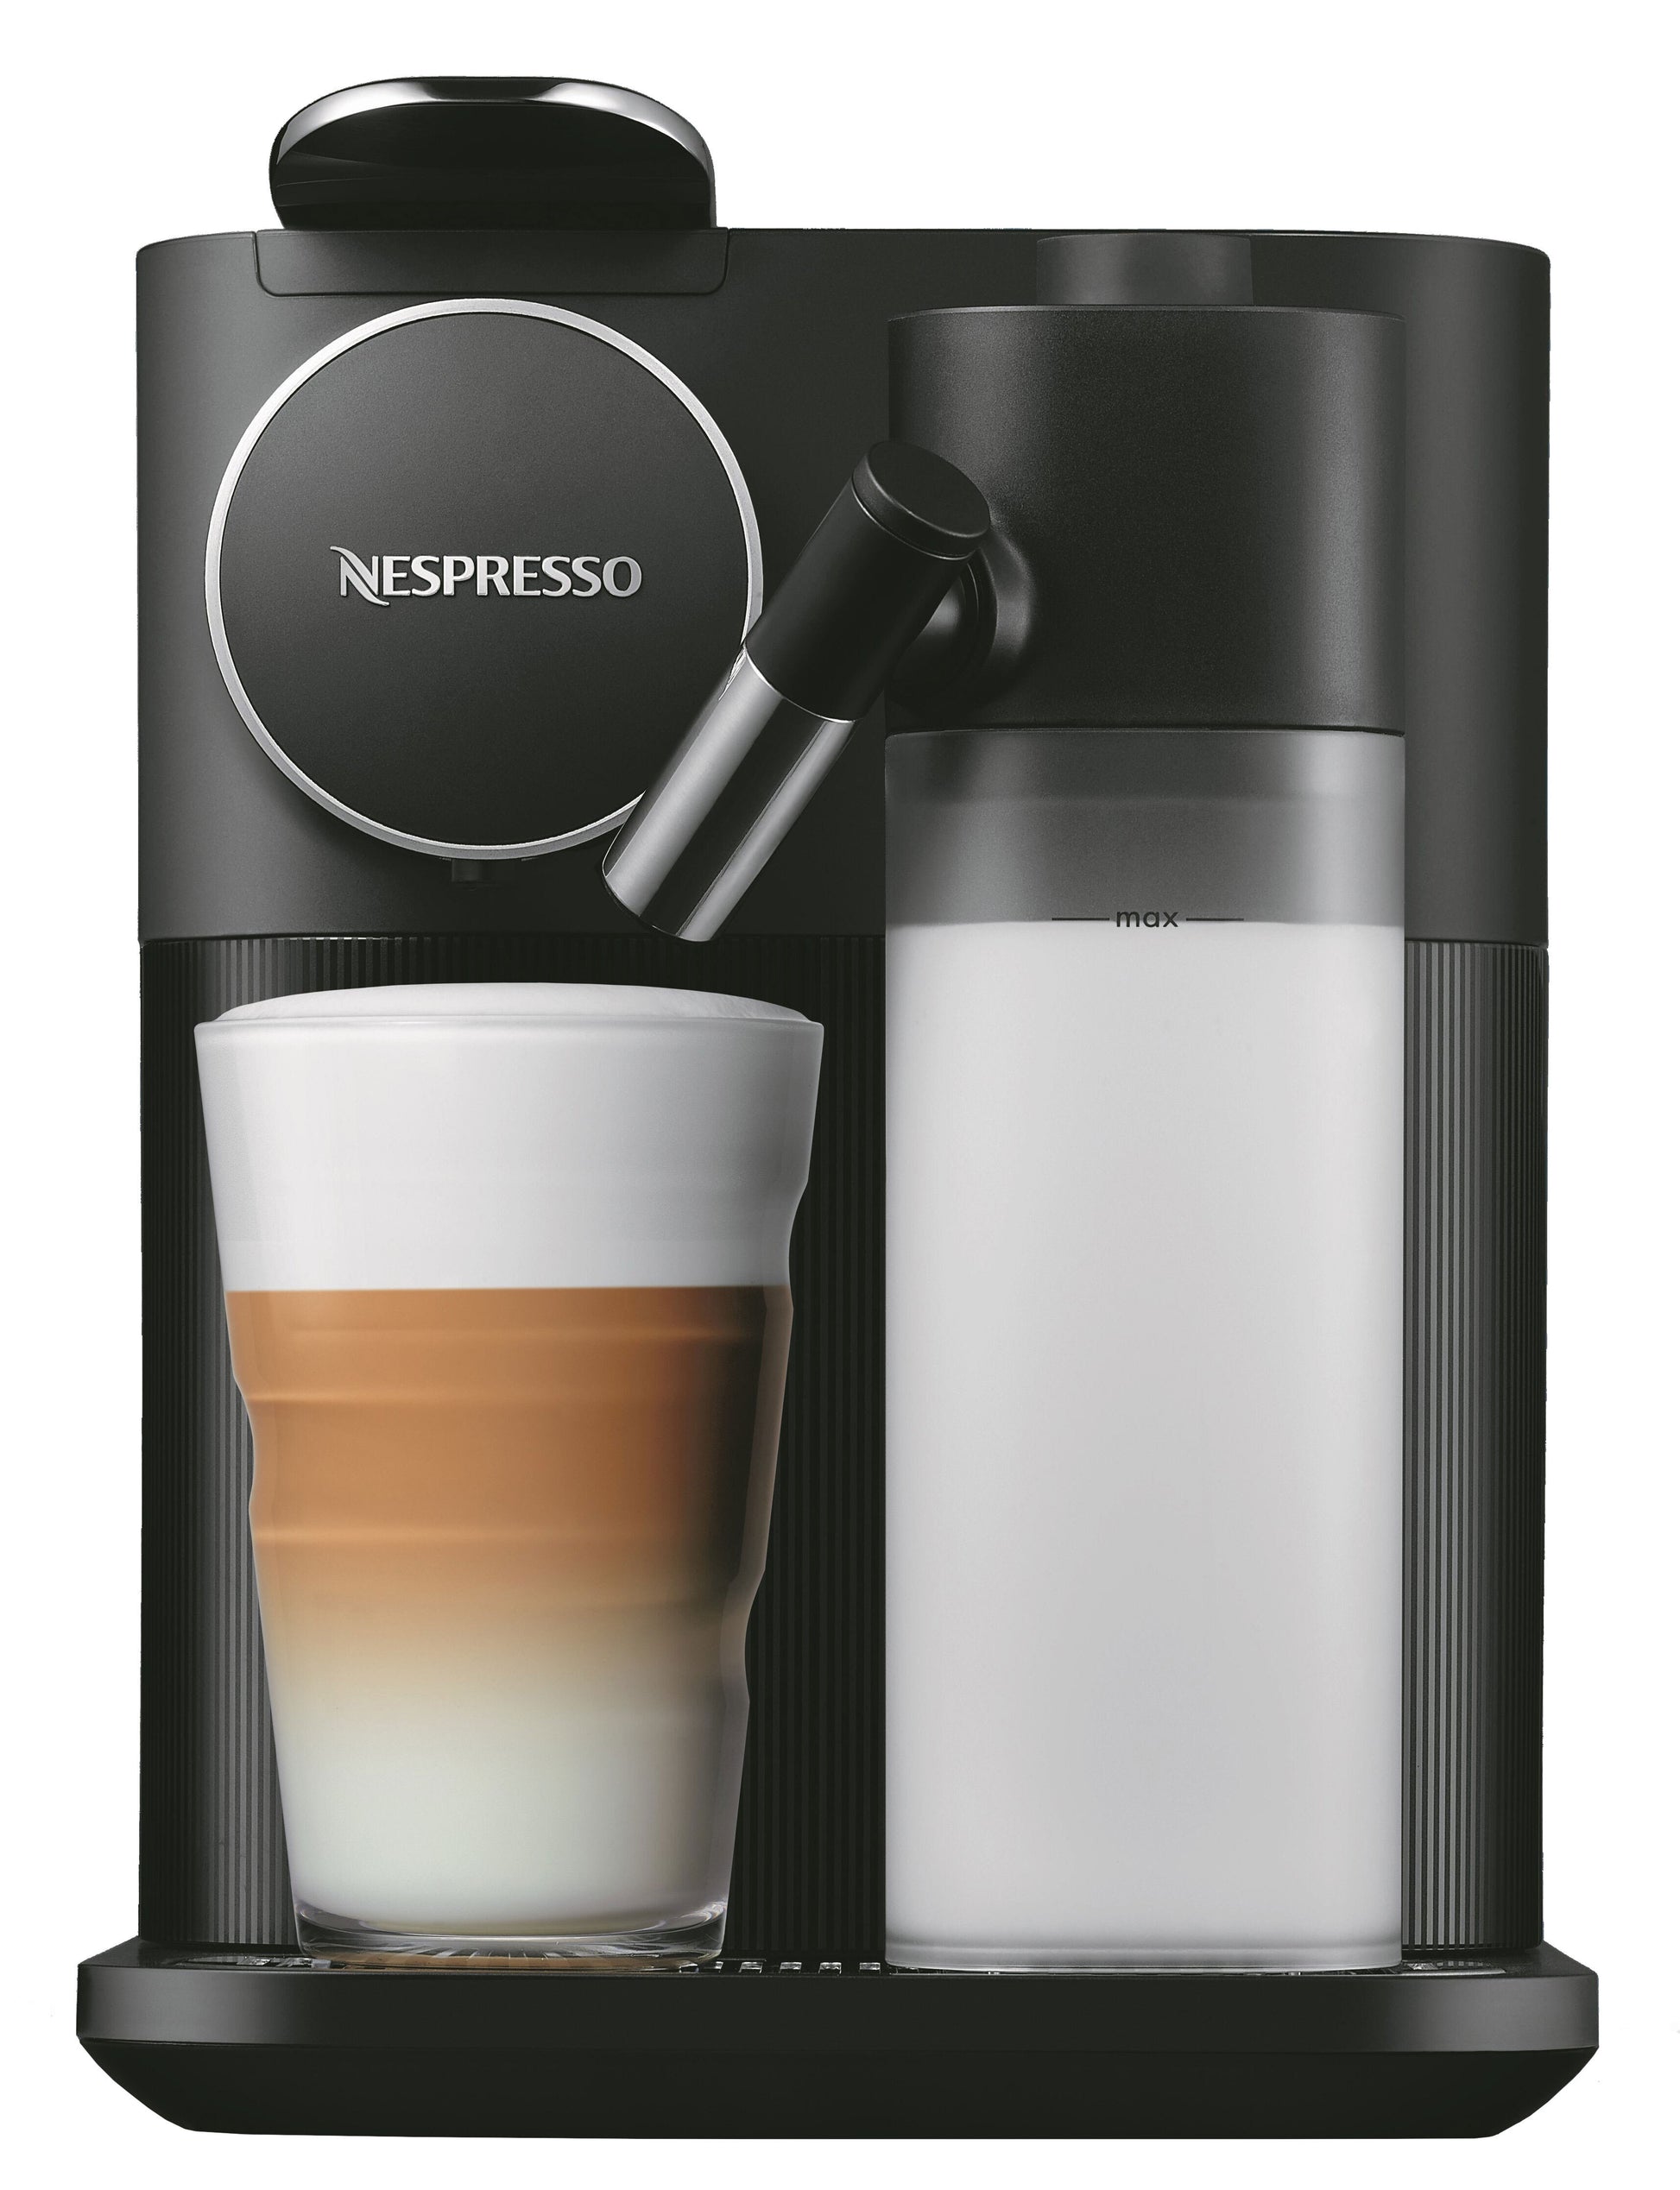 Want a way to make lattes at home? We tried the Nespresso Lattissima to see  if it's up to the job